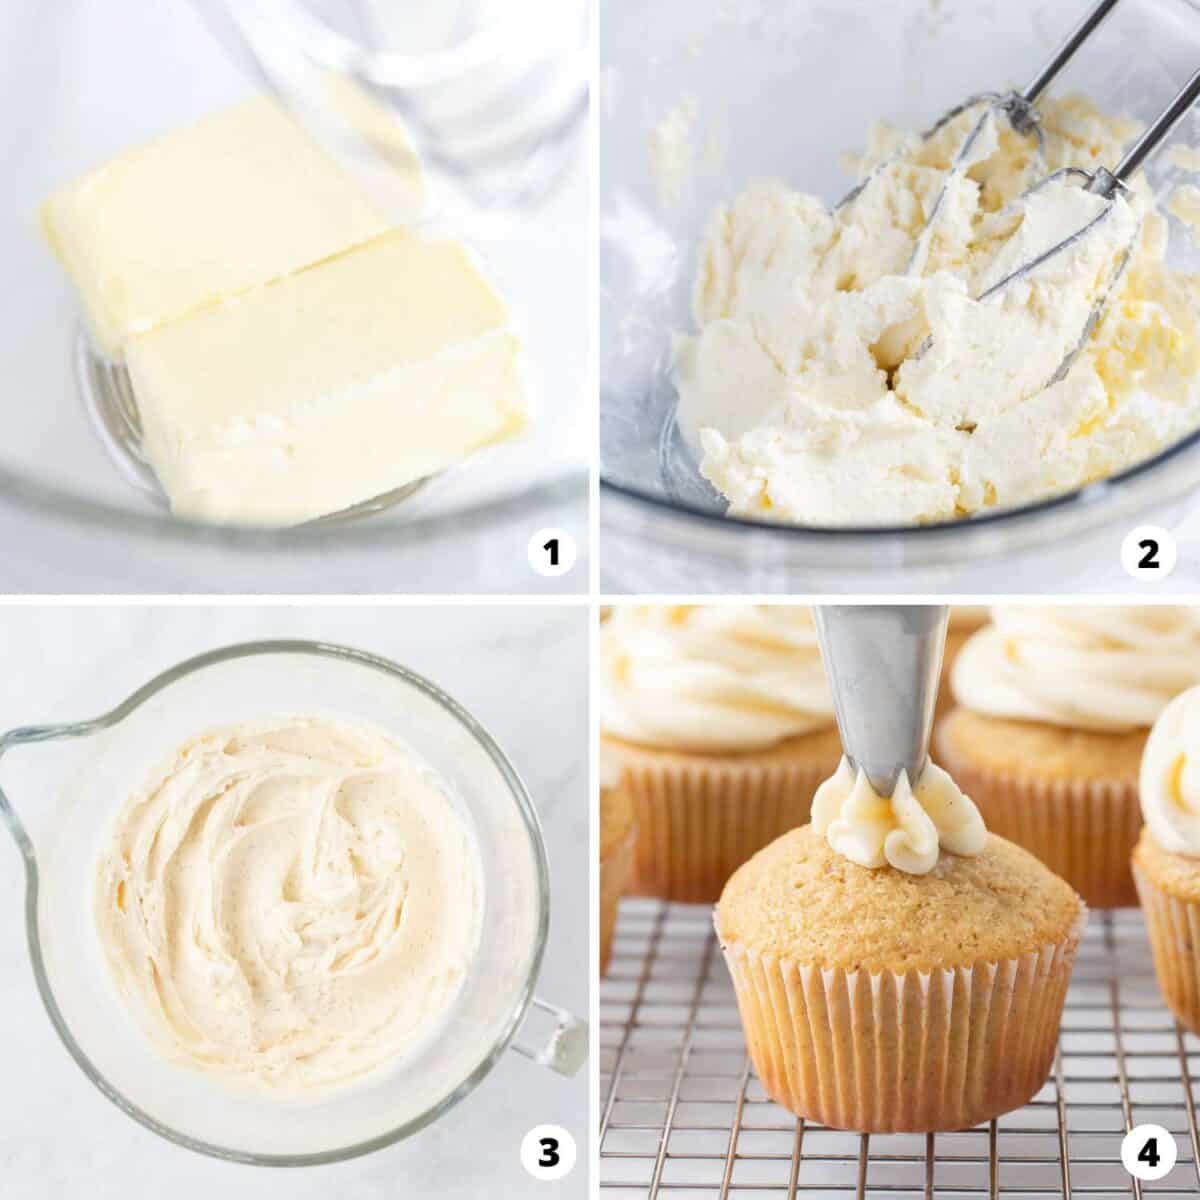 Showing how to make eggnog frosting in a 4 step collage.